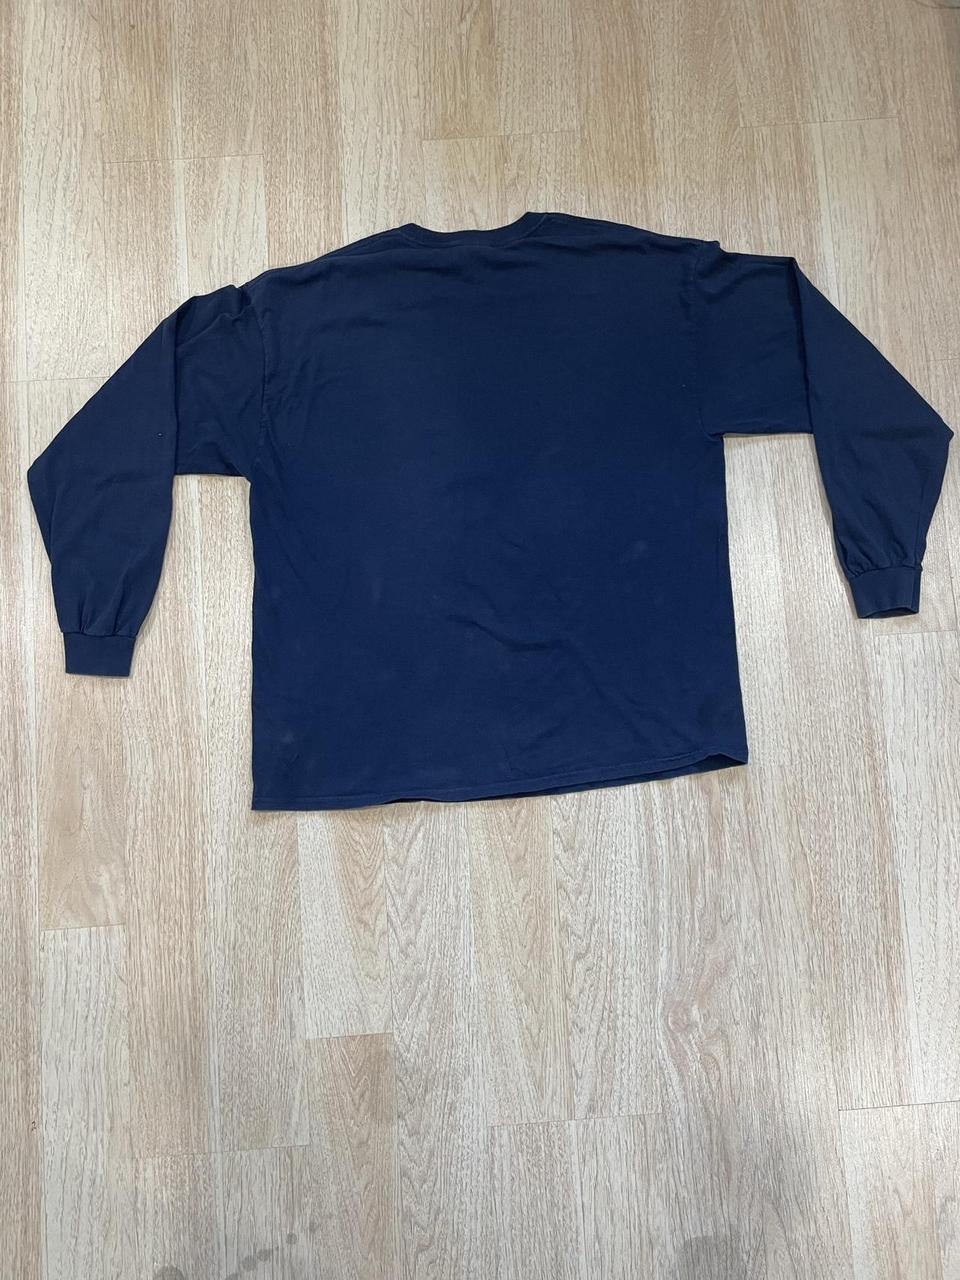 Blue Cozumel Mexico long sleeve in perfect condition - Depop